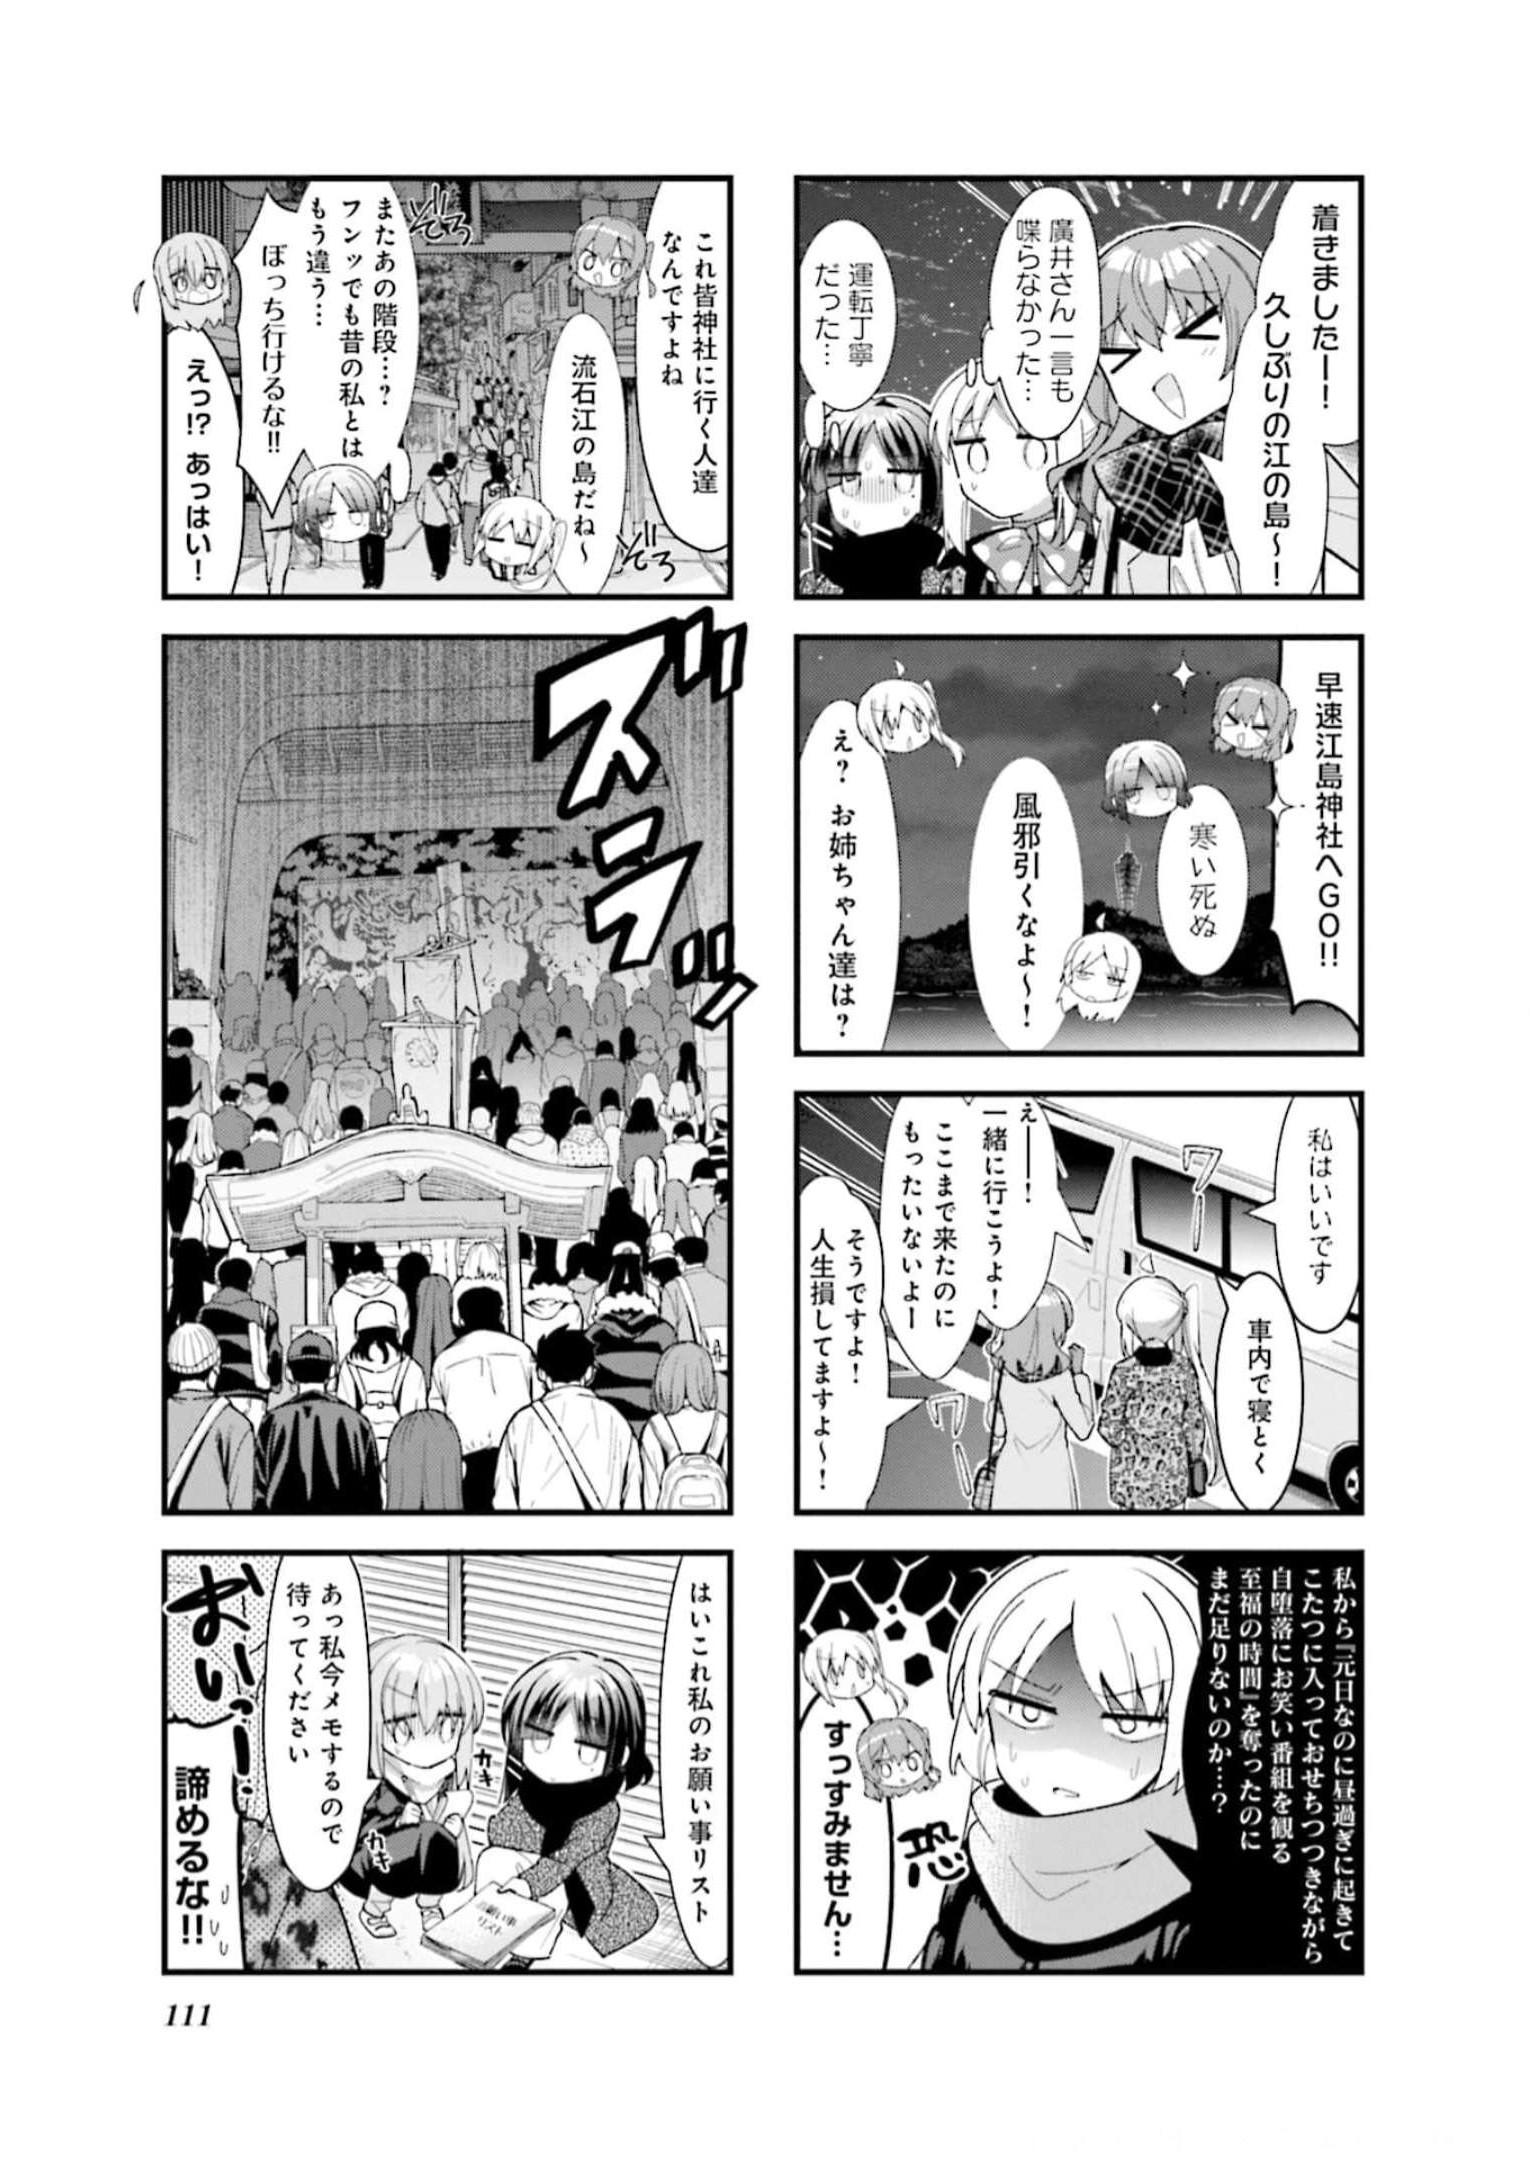 Bocchi the Rock! - Chapter 69 - Page 3